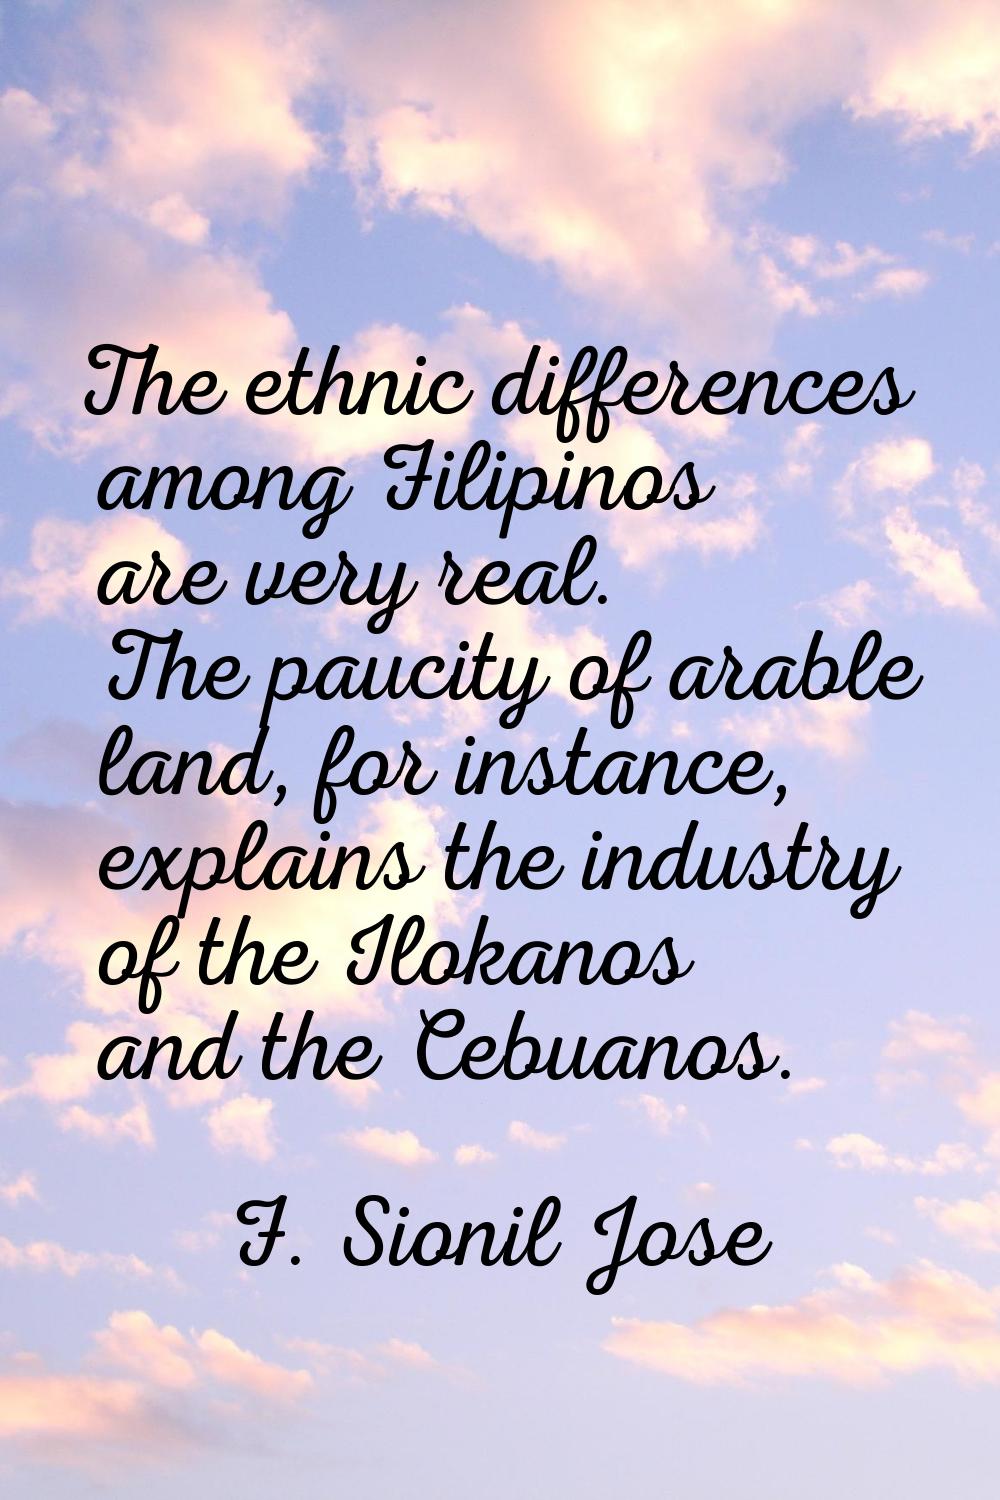 The ethnic differences among Filipinos are very real. The paucity of arable land, for instance, exp